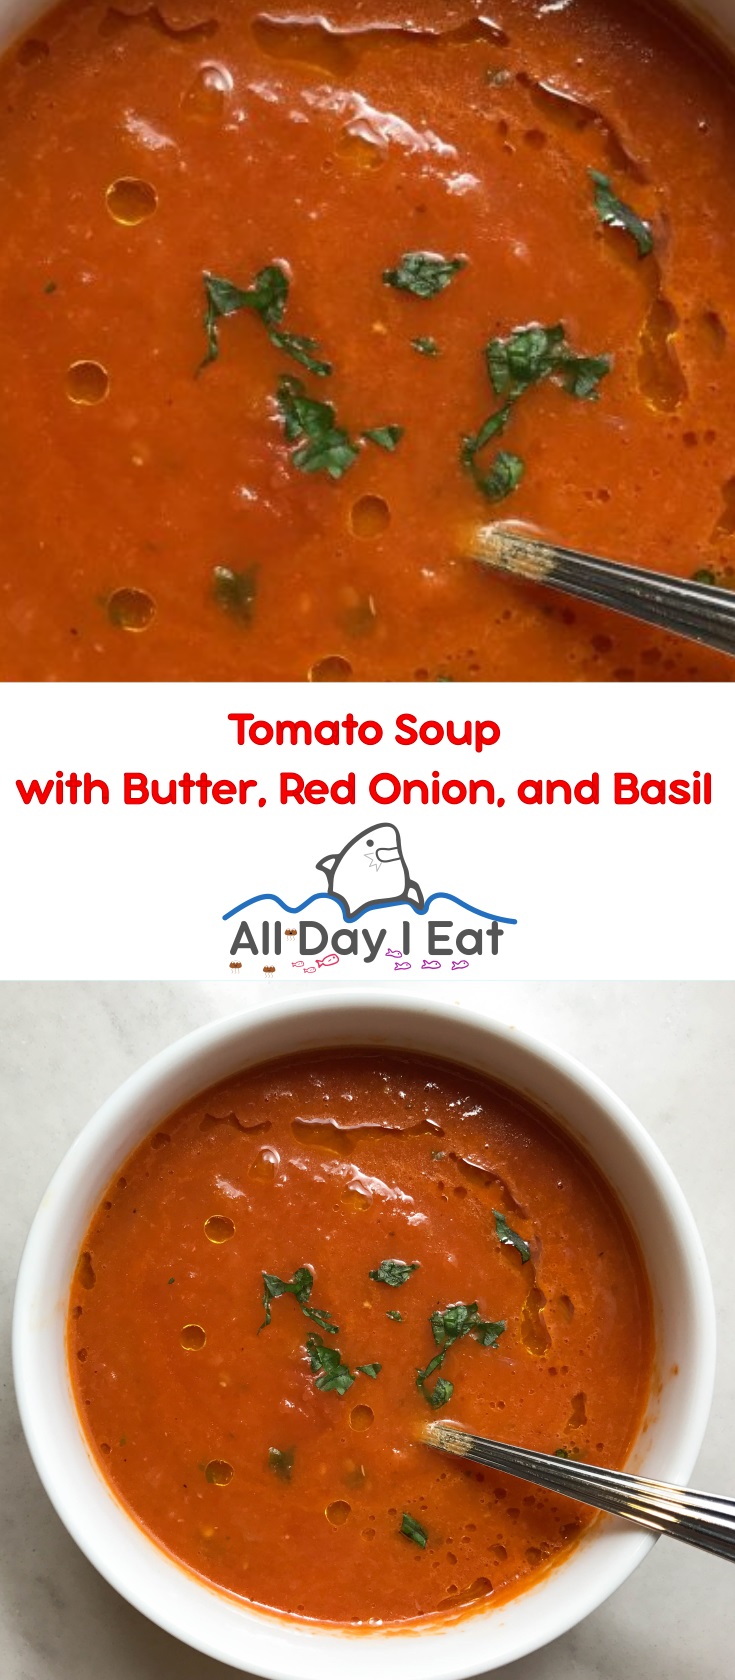 Tomato Soup with Butter, Red Onion, and Basil | www.alldayieat.com